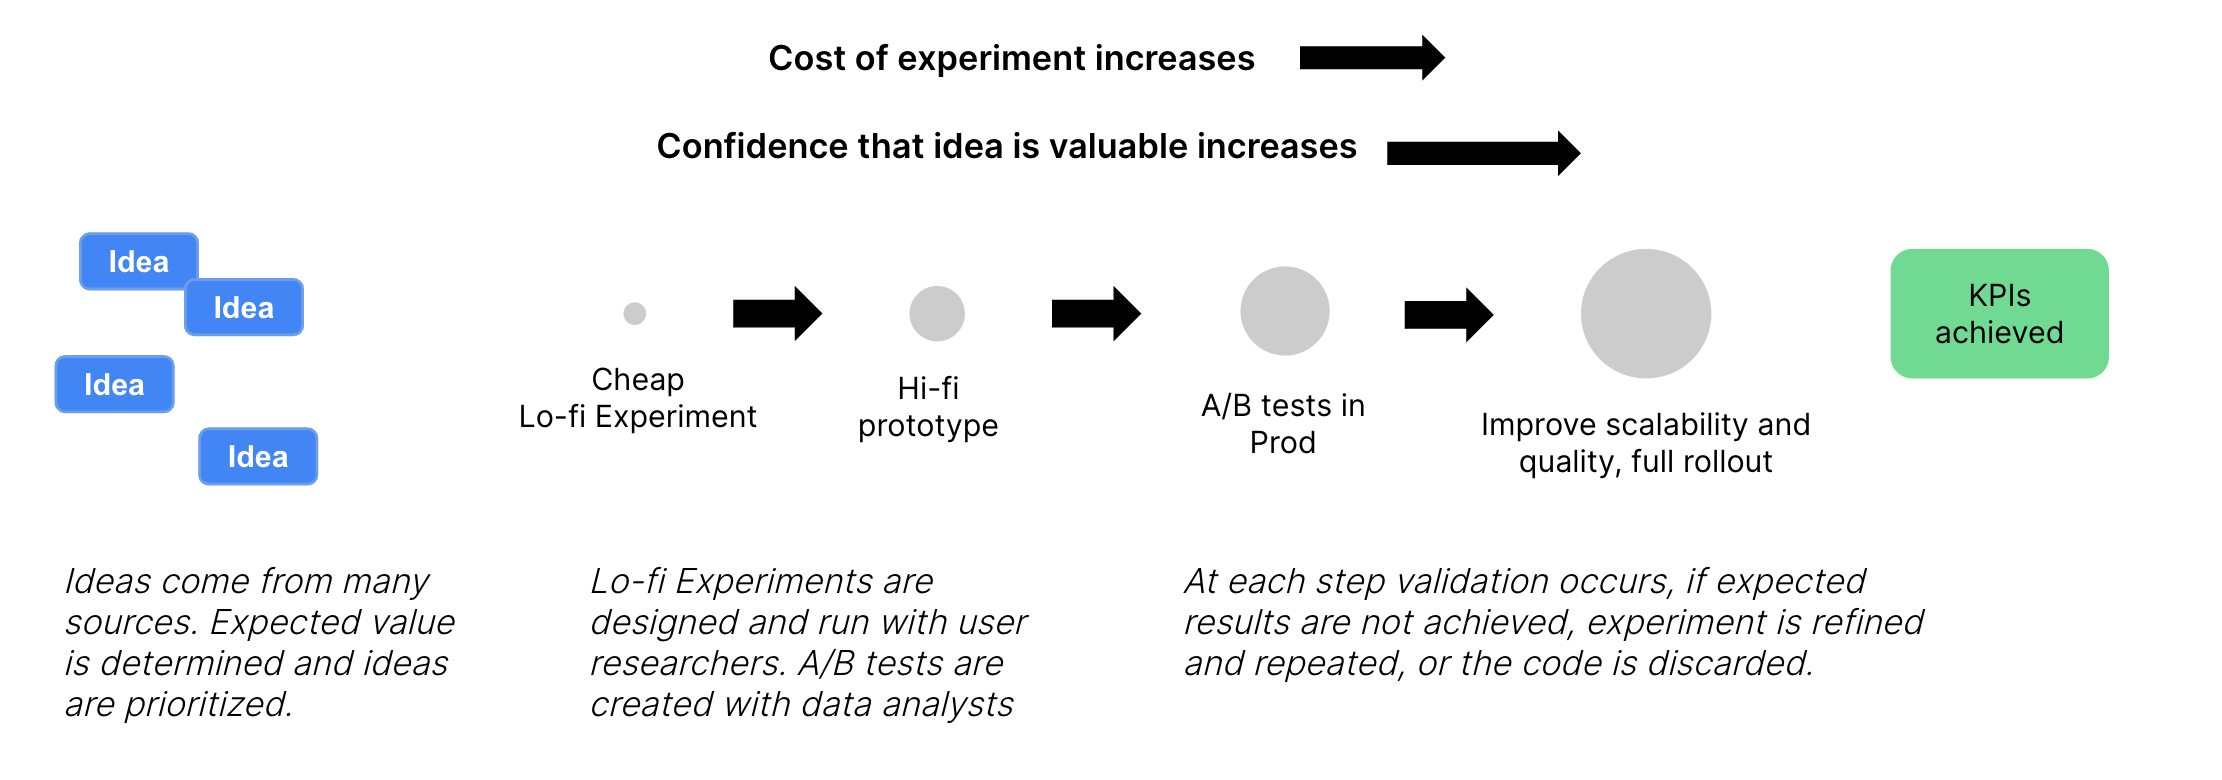 etsy experiment validation | jrdhub | Introducing a product delivery culture at Etsy | https://jrdhub.com